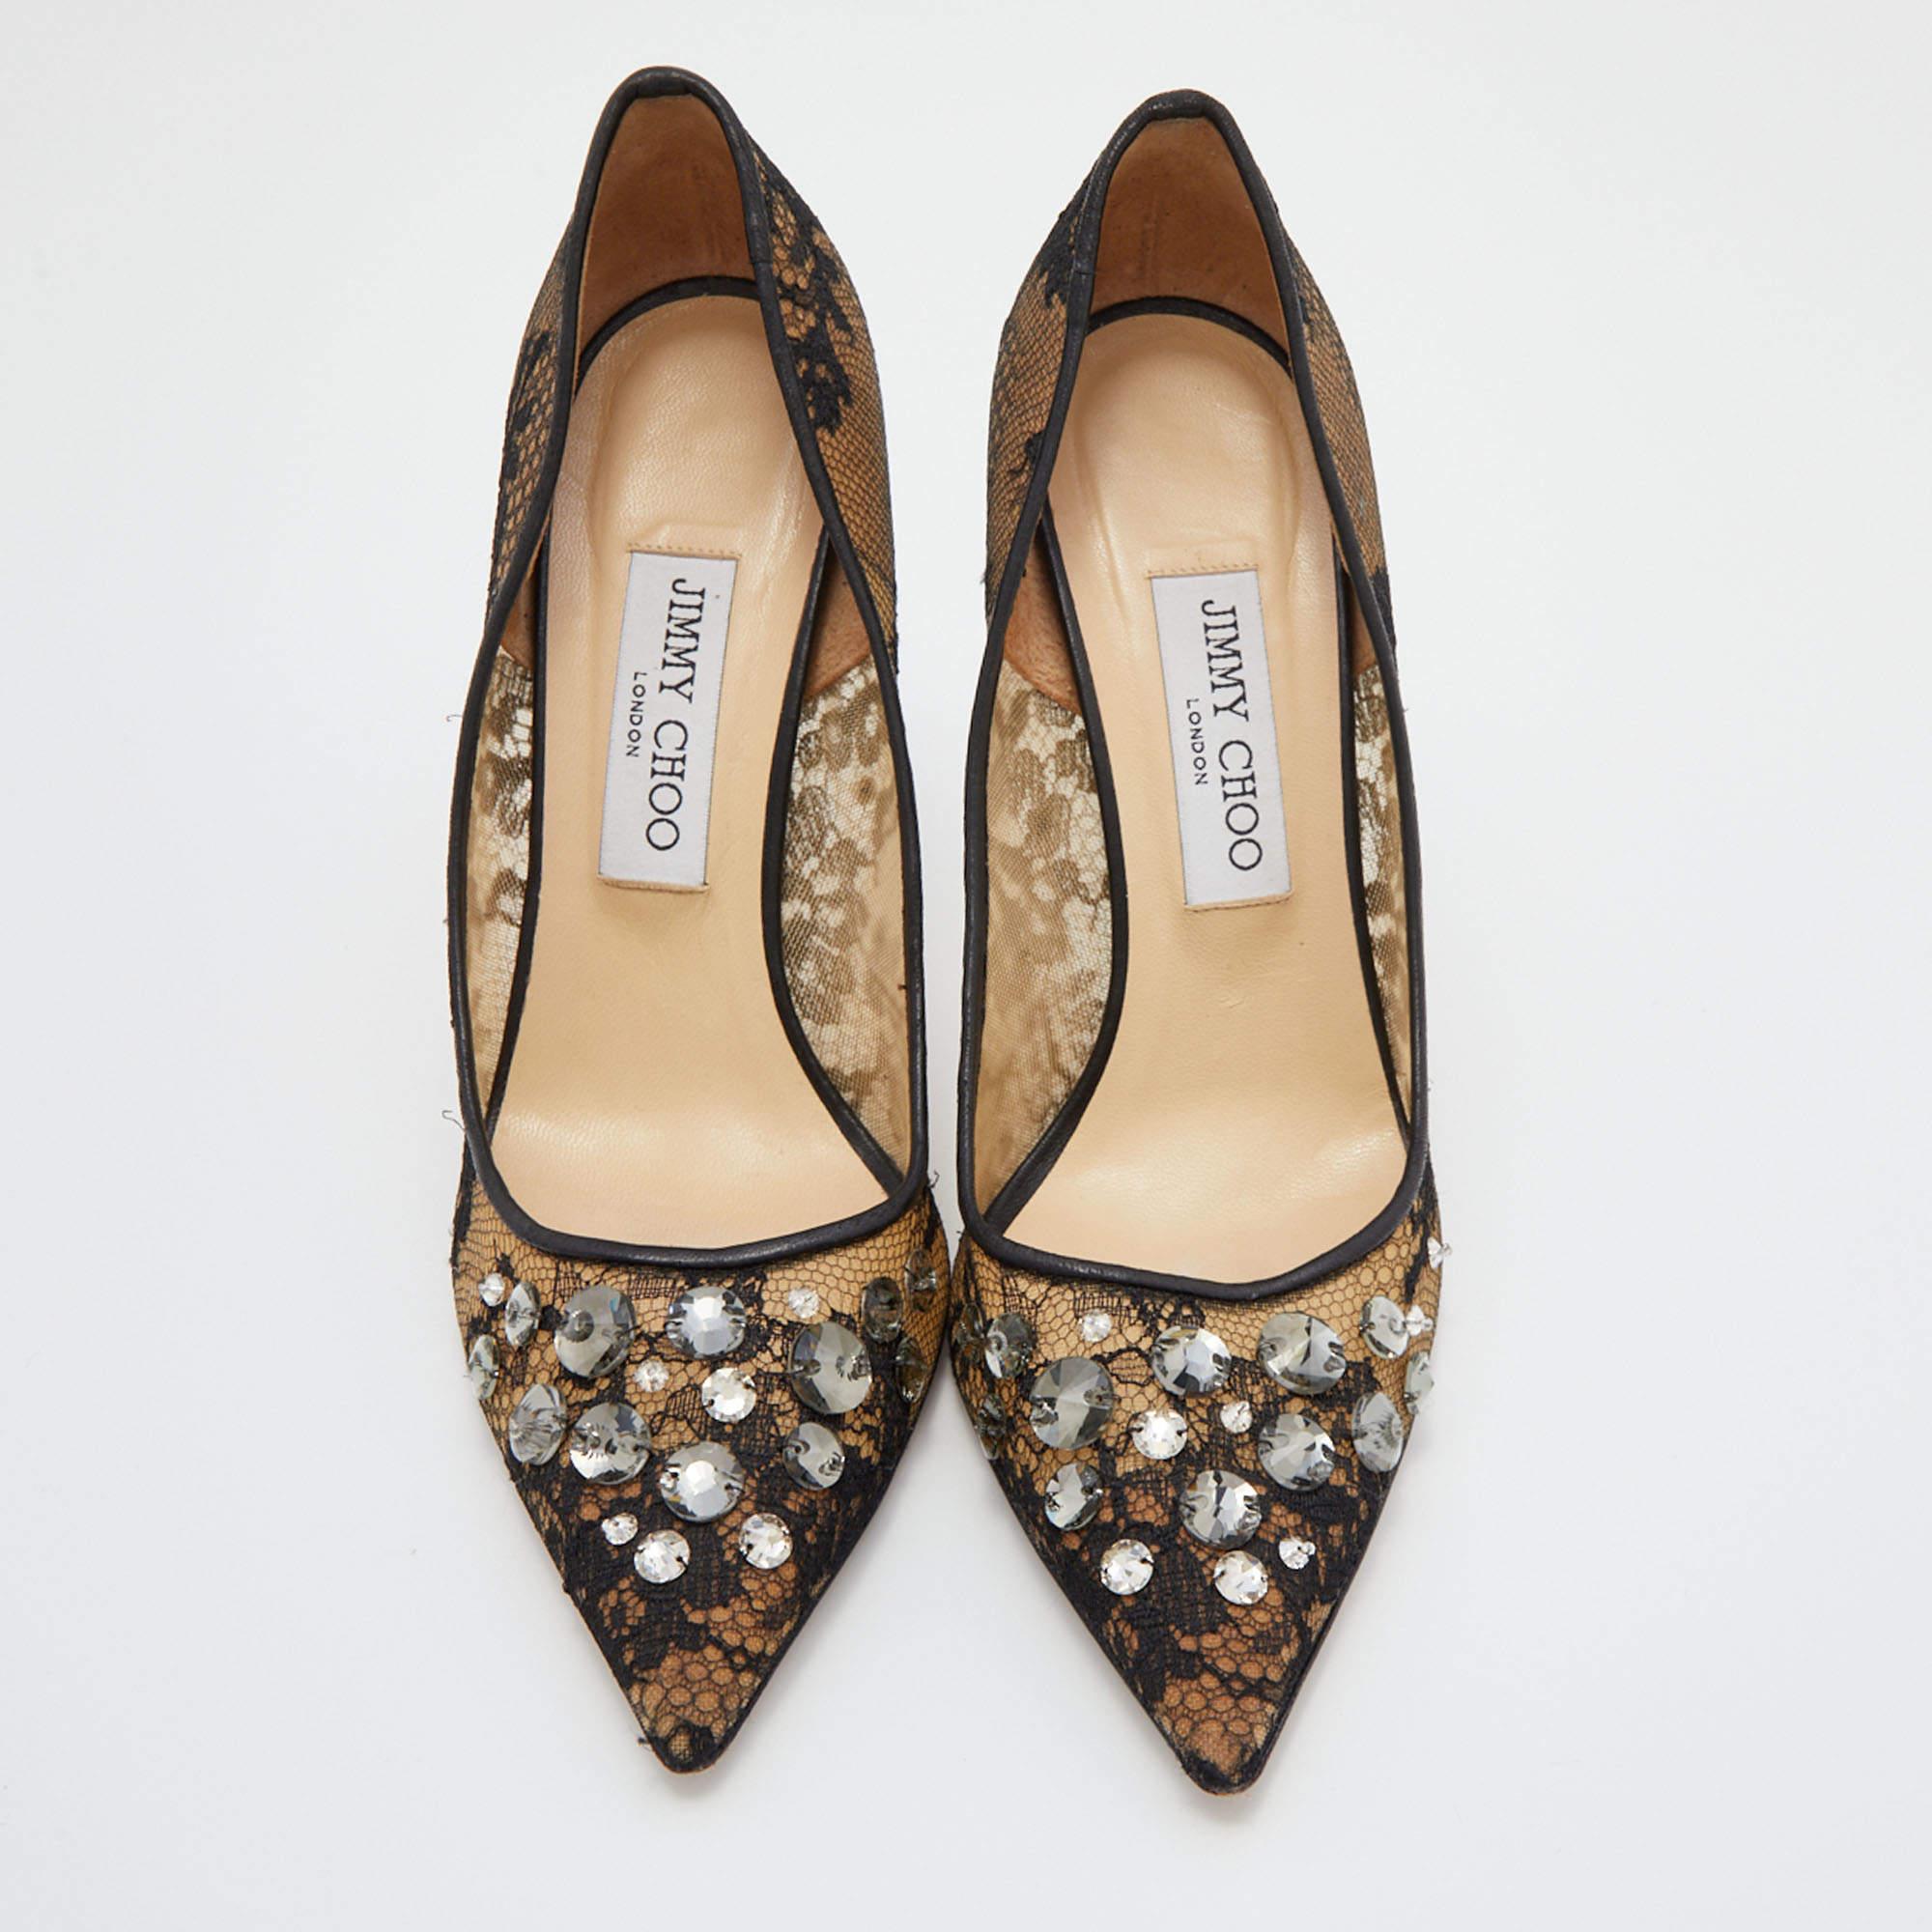 Exhibit an elegant style with this pair of pumps. These designer pumps are crafted from quality materials. They are set on durable soles and high heels.

